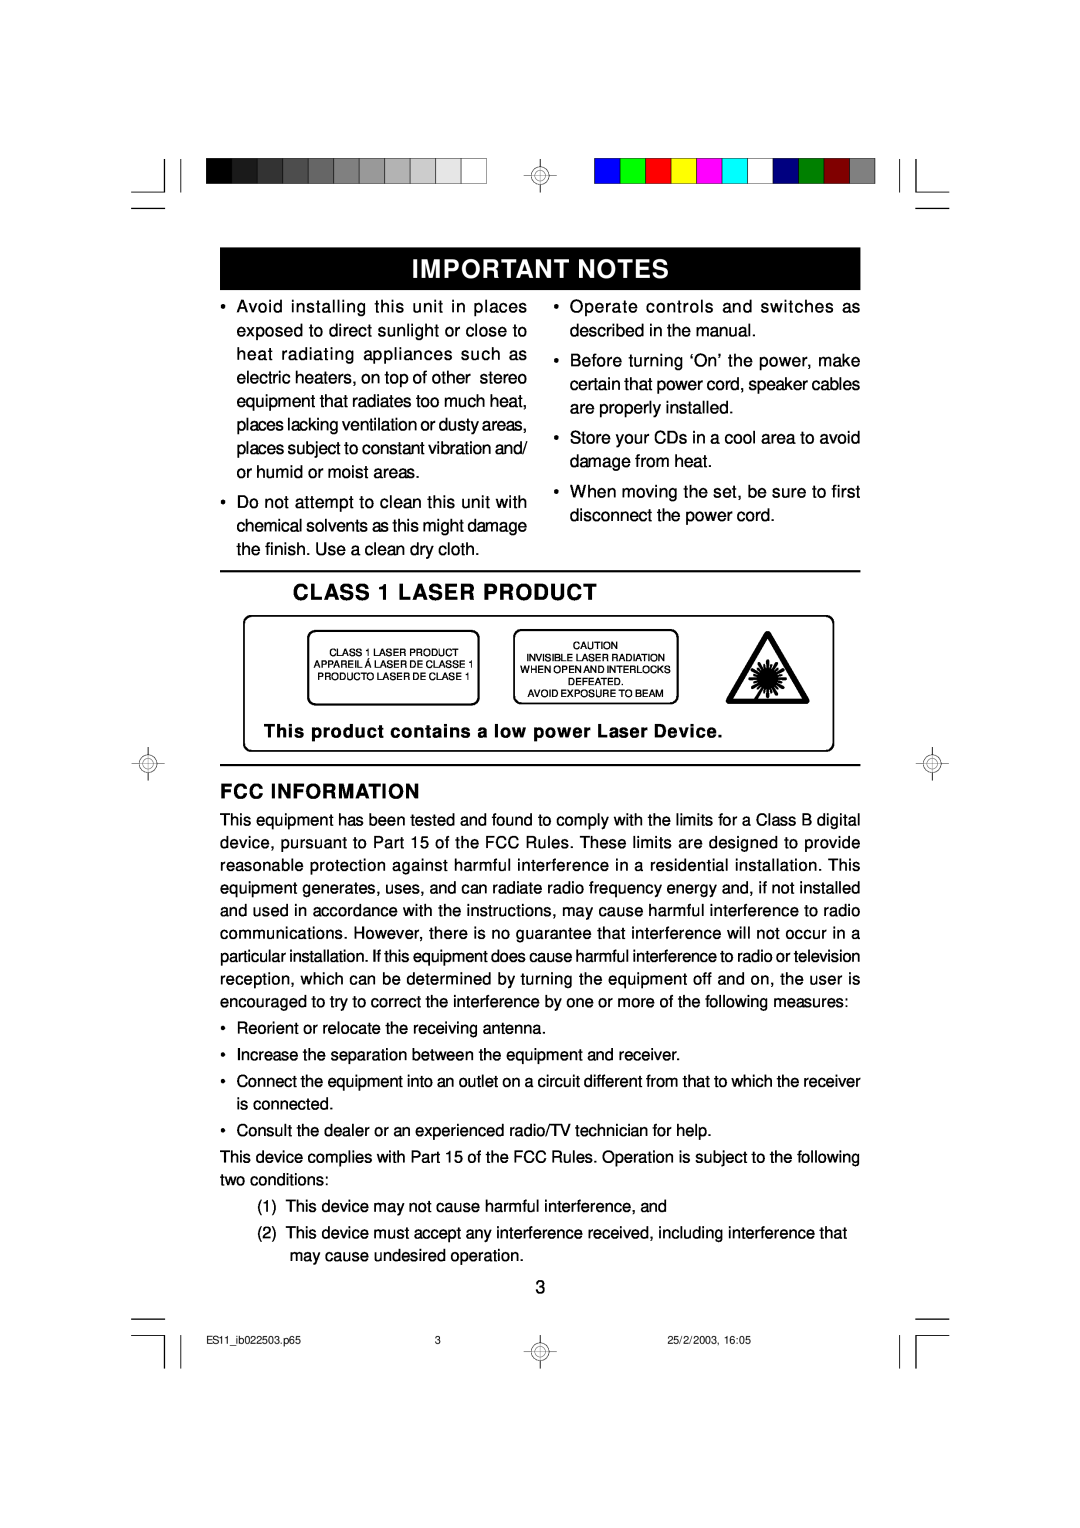 Emerson ES11 owner manual Important Notes, CLASS 1 LASER PRODUCT, Fcc Information 